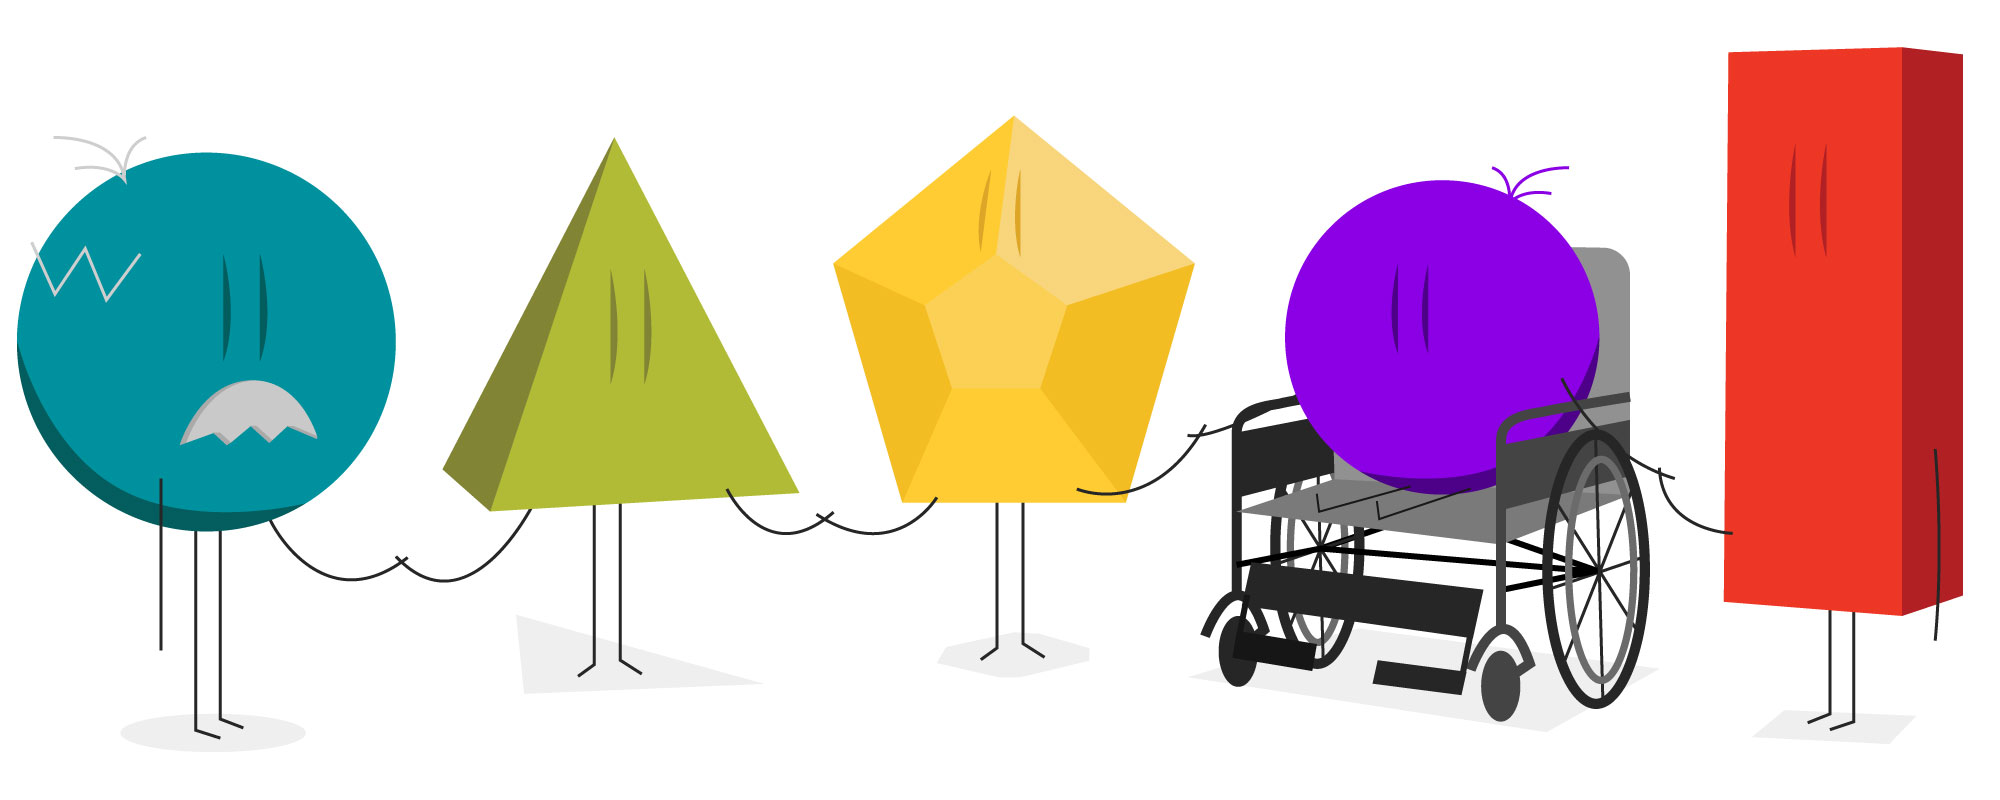 symbolic icons representing employee diversity in different shapes and sizes